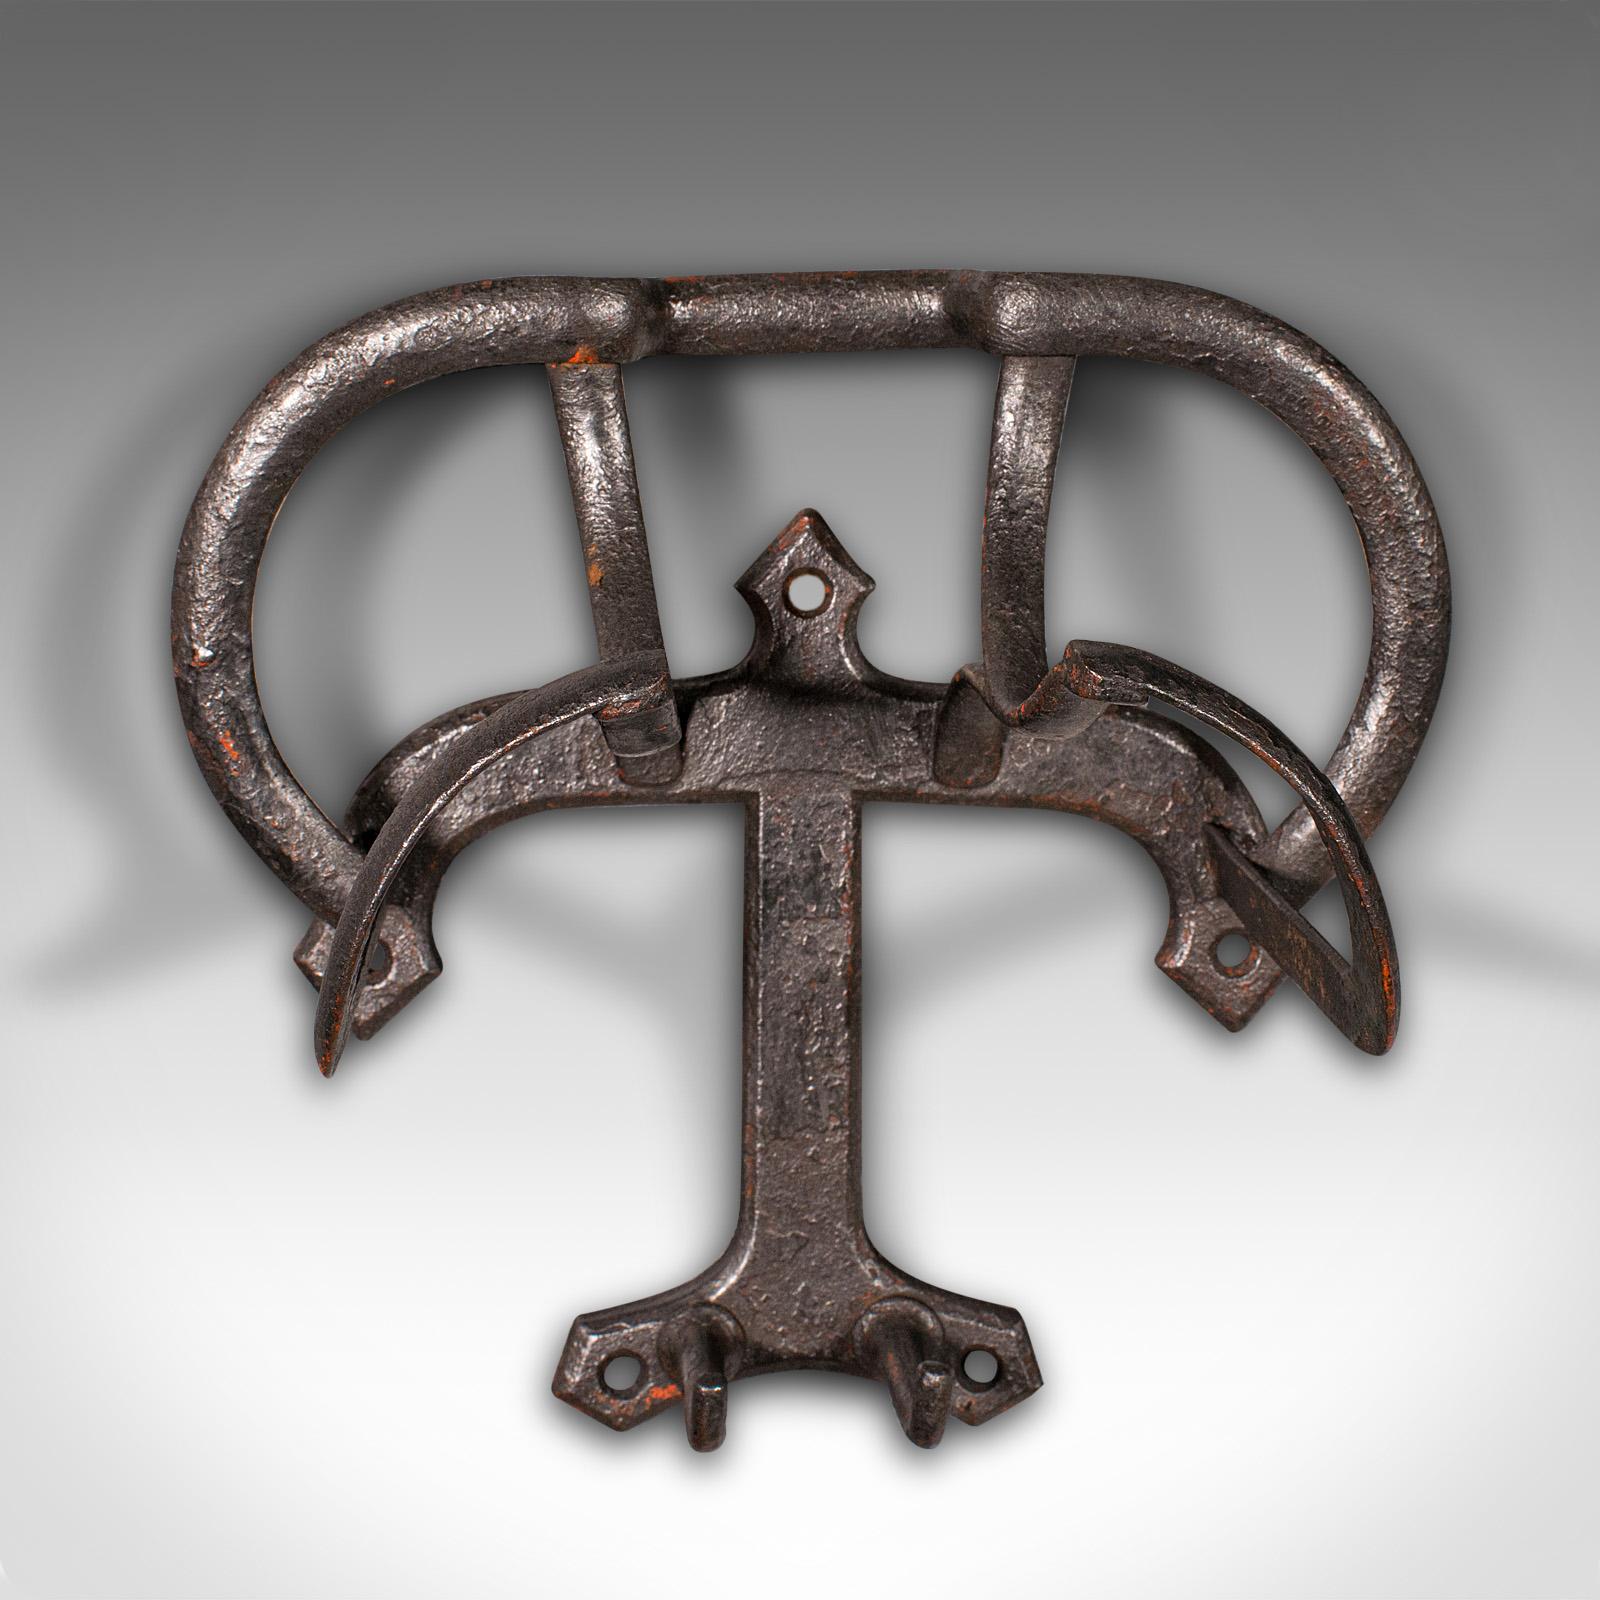 Late Victorian Pair Of Antique Saddle Racks, English, Stables, Equestrian Tack Rest, Victorian